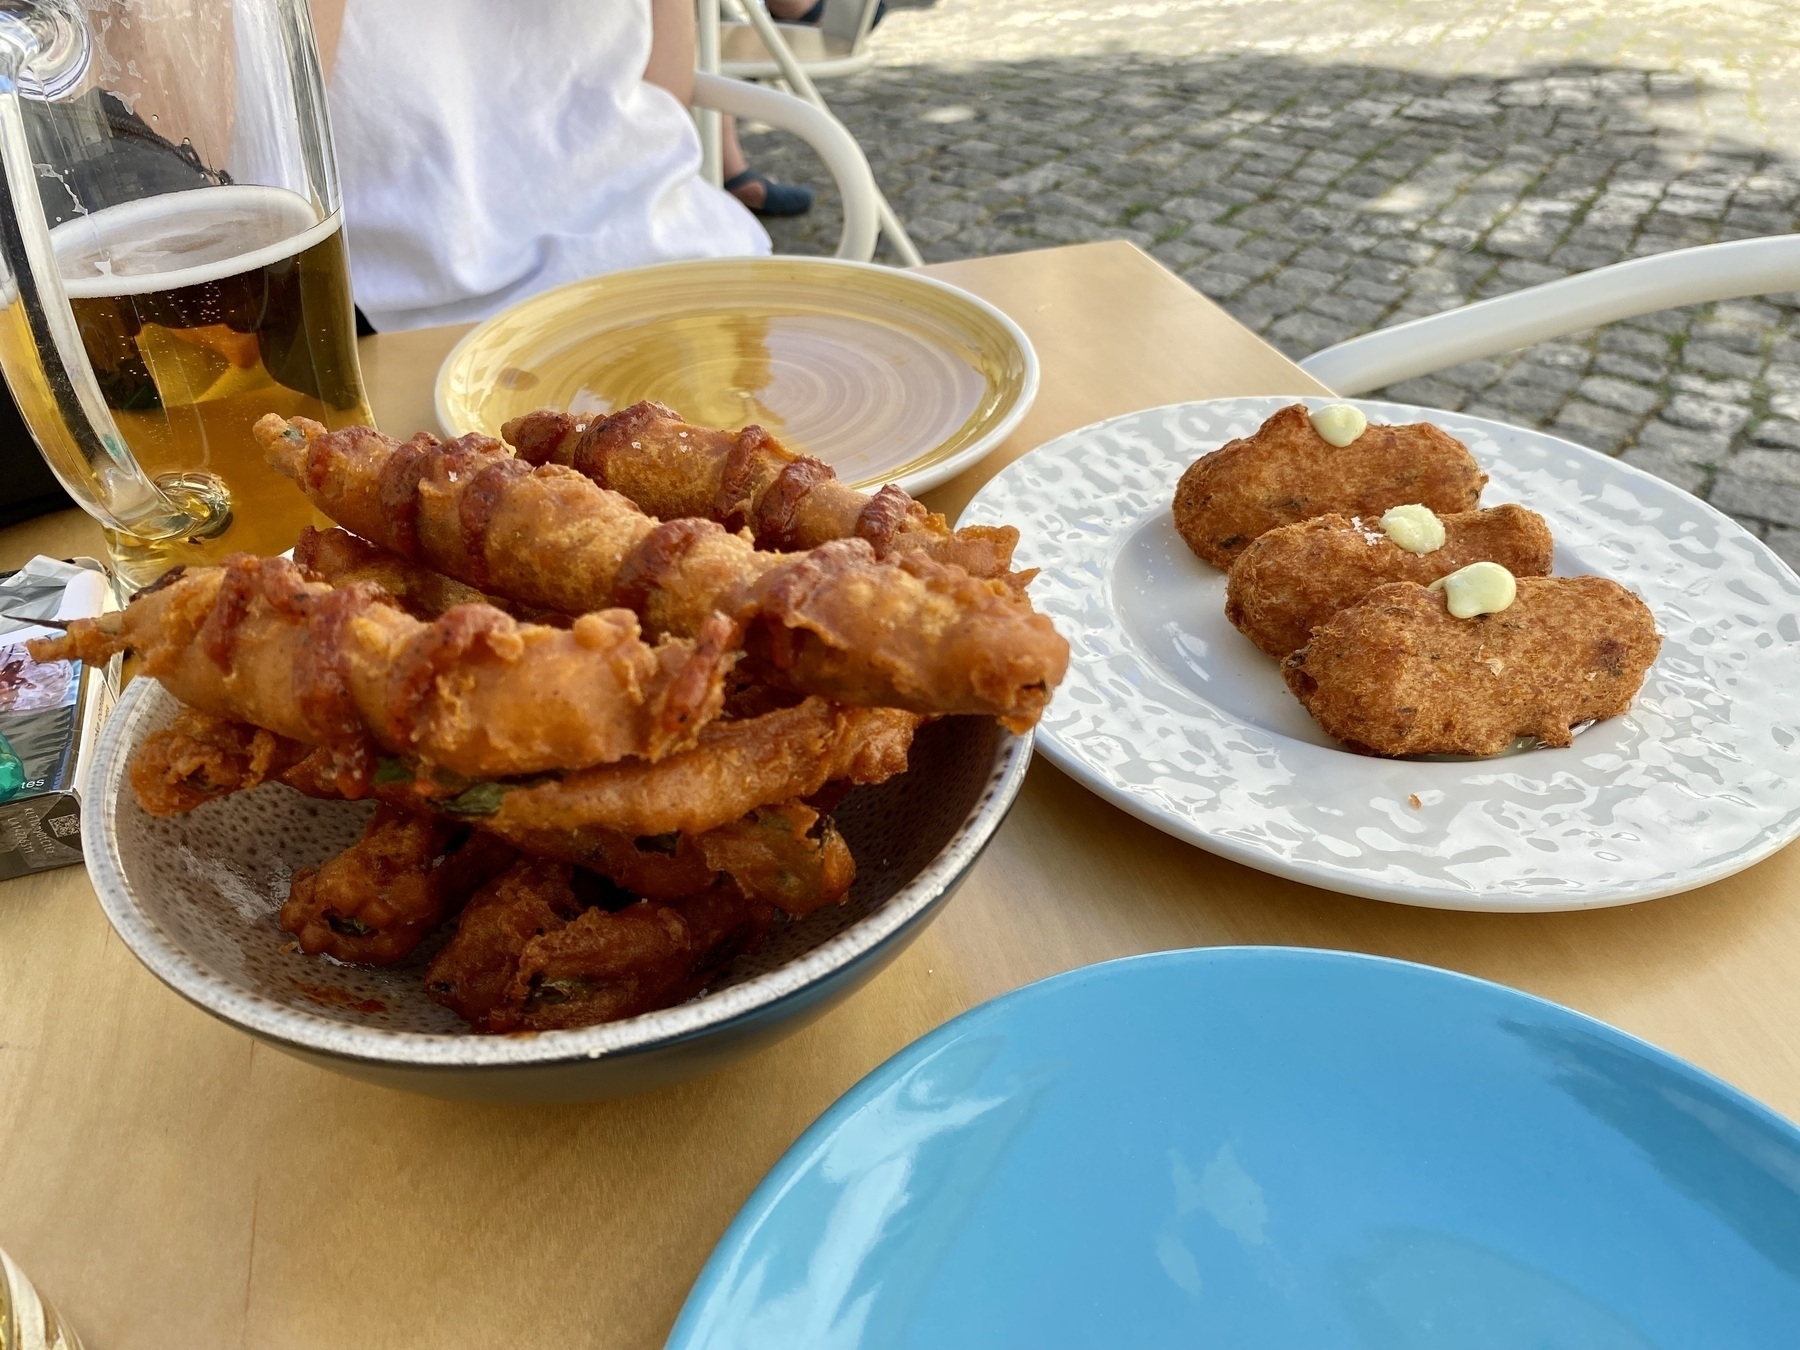 Plates of fried food on a table